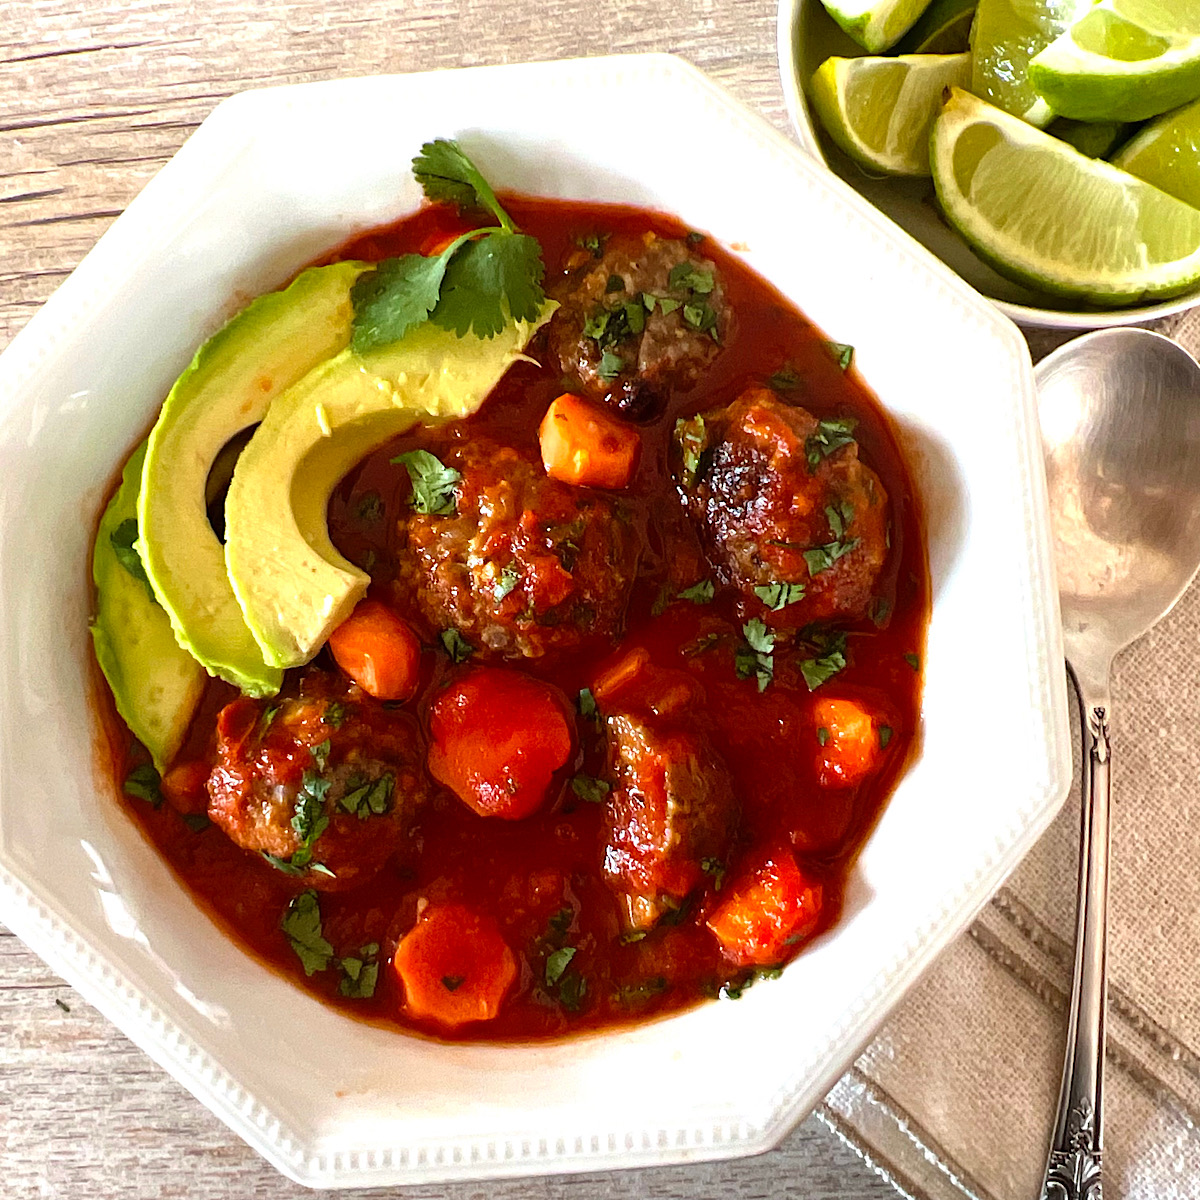 Bowl of Mexican meatball souop (Albondigas) with avocado garnish.